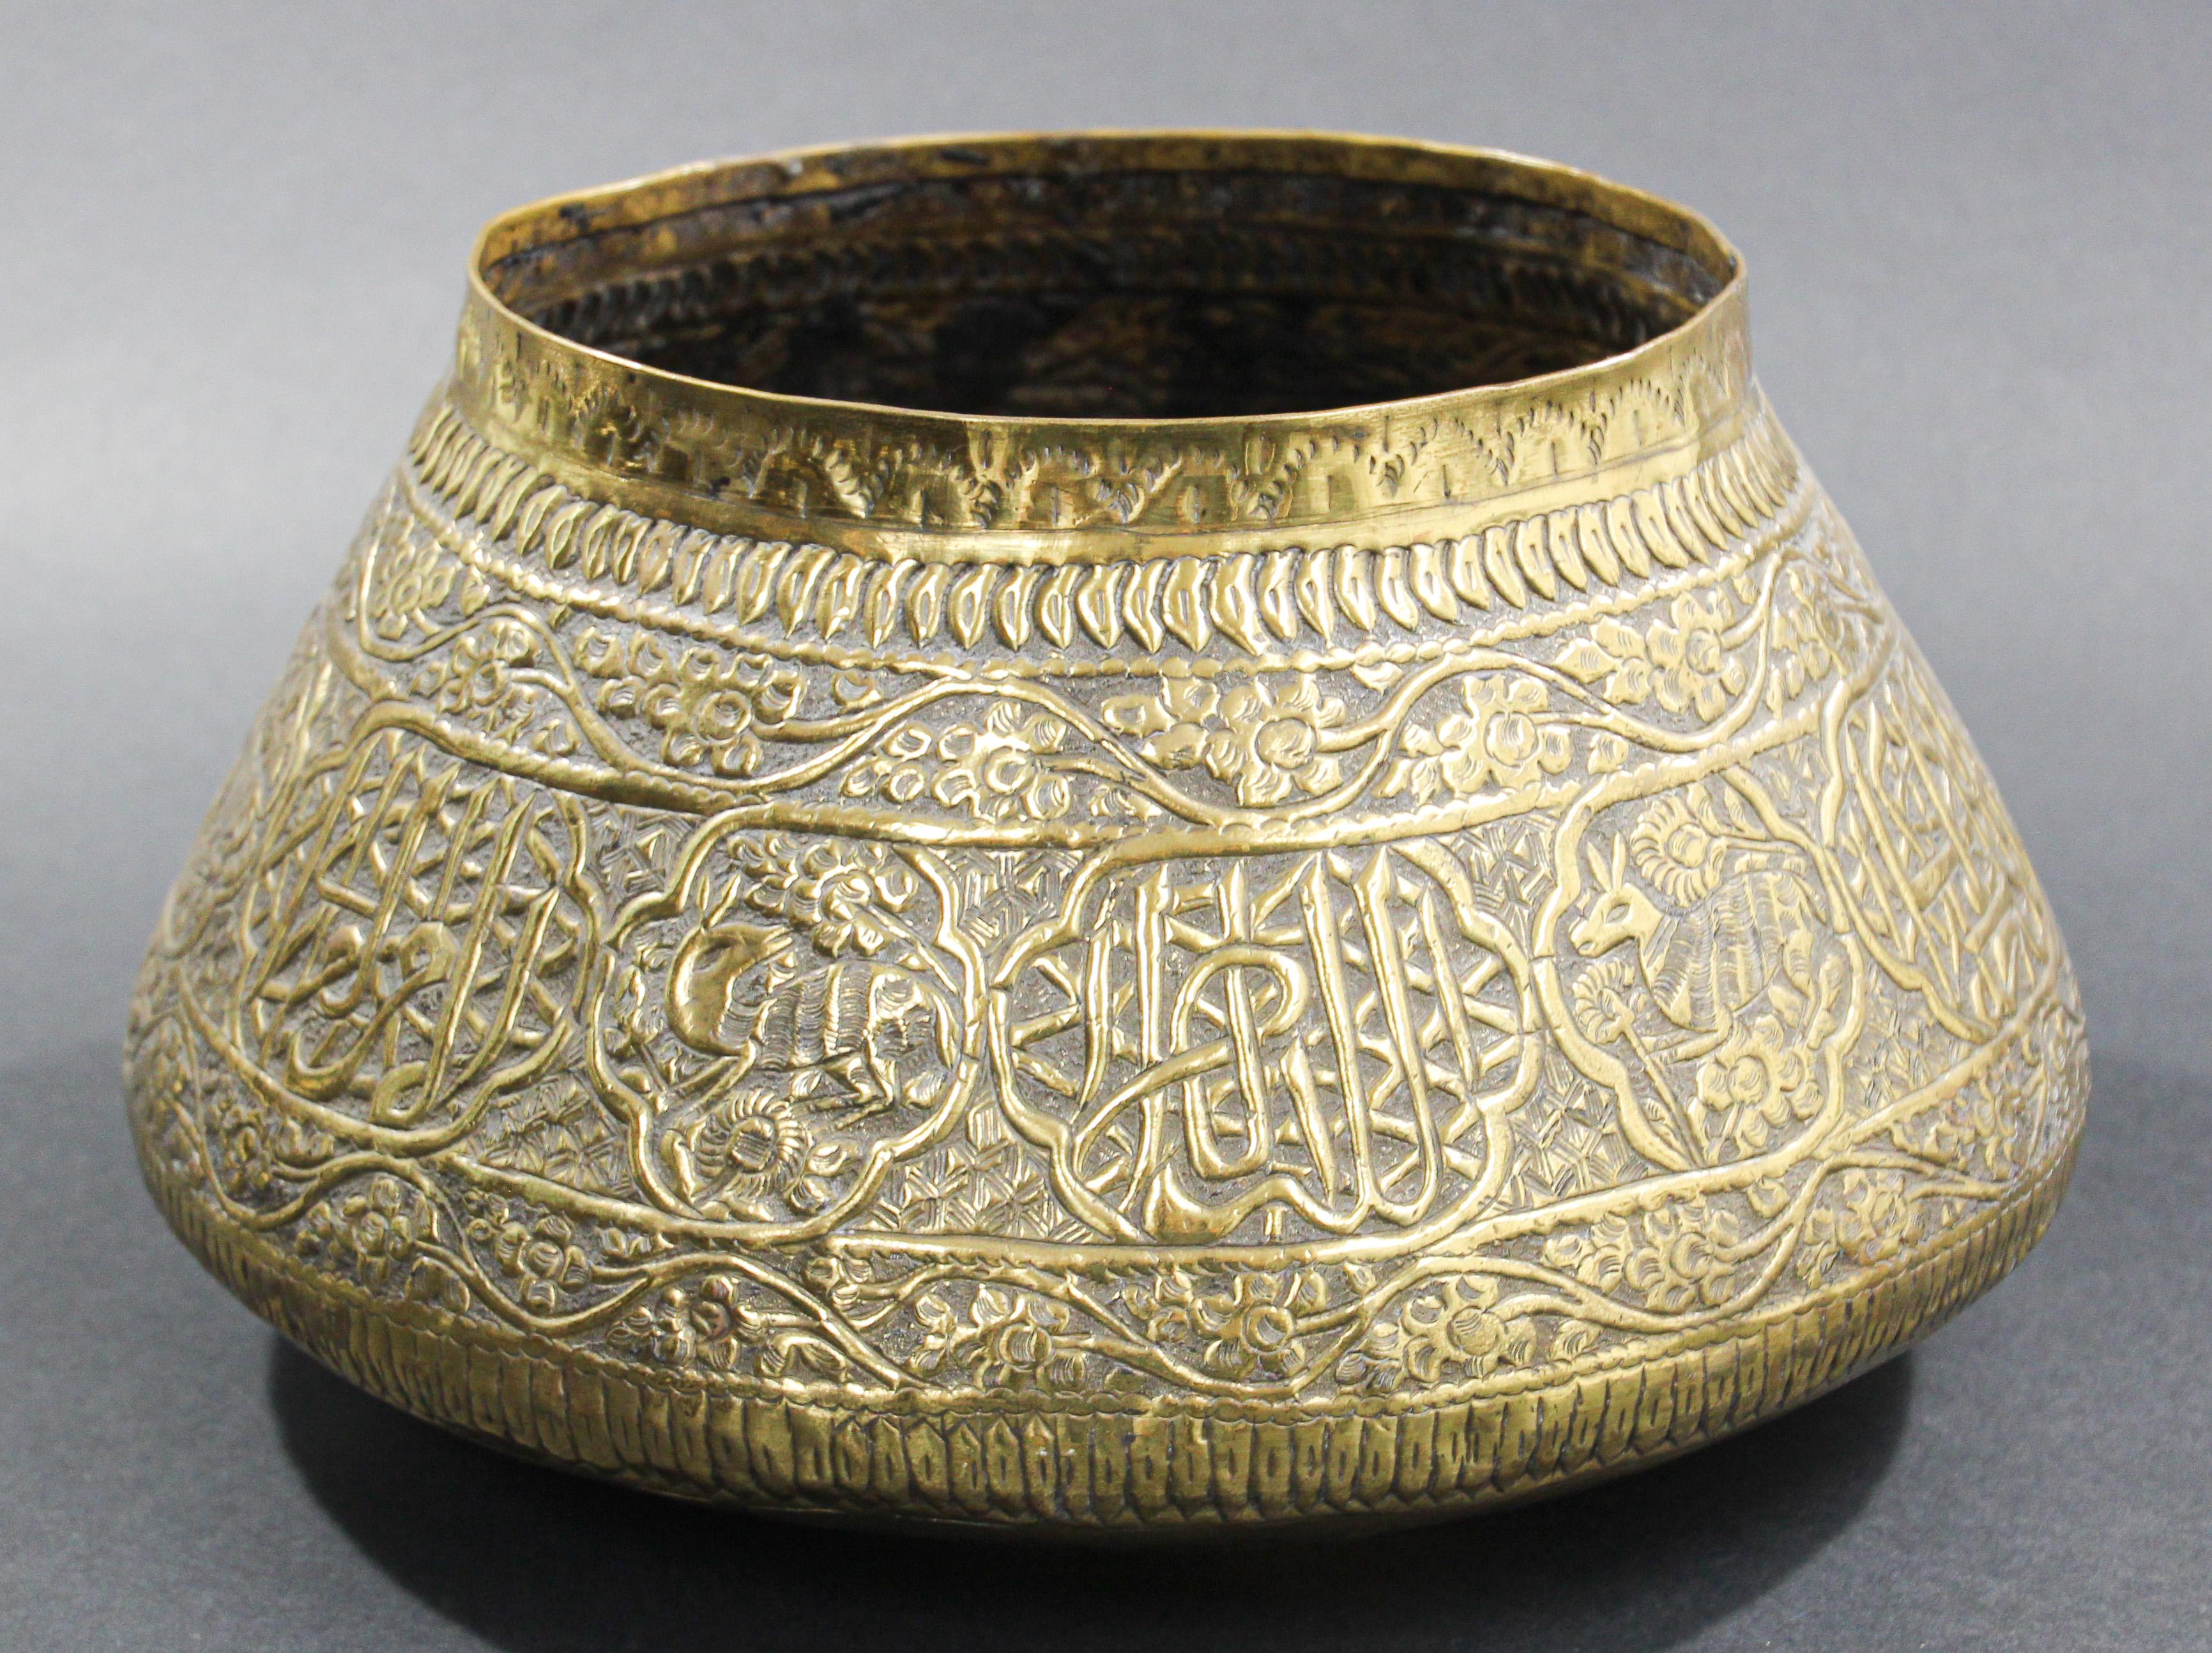 Middle Eastern Brass Bowl with Arabic Calligraphy Writing For Sale 9